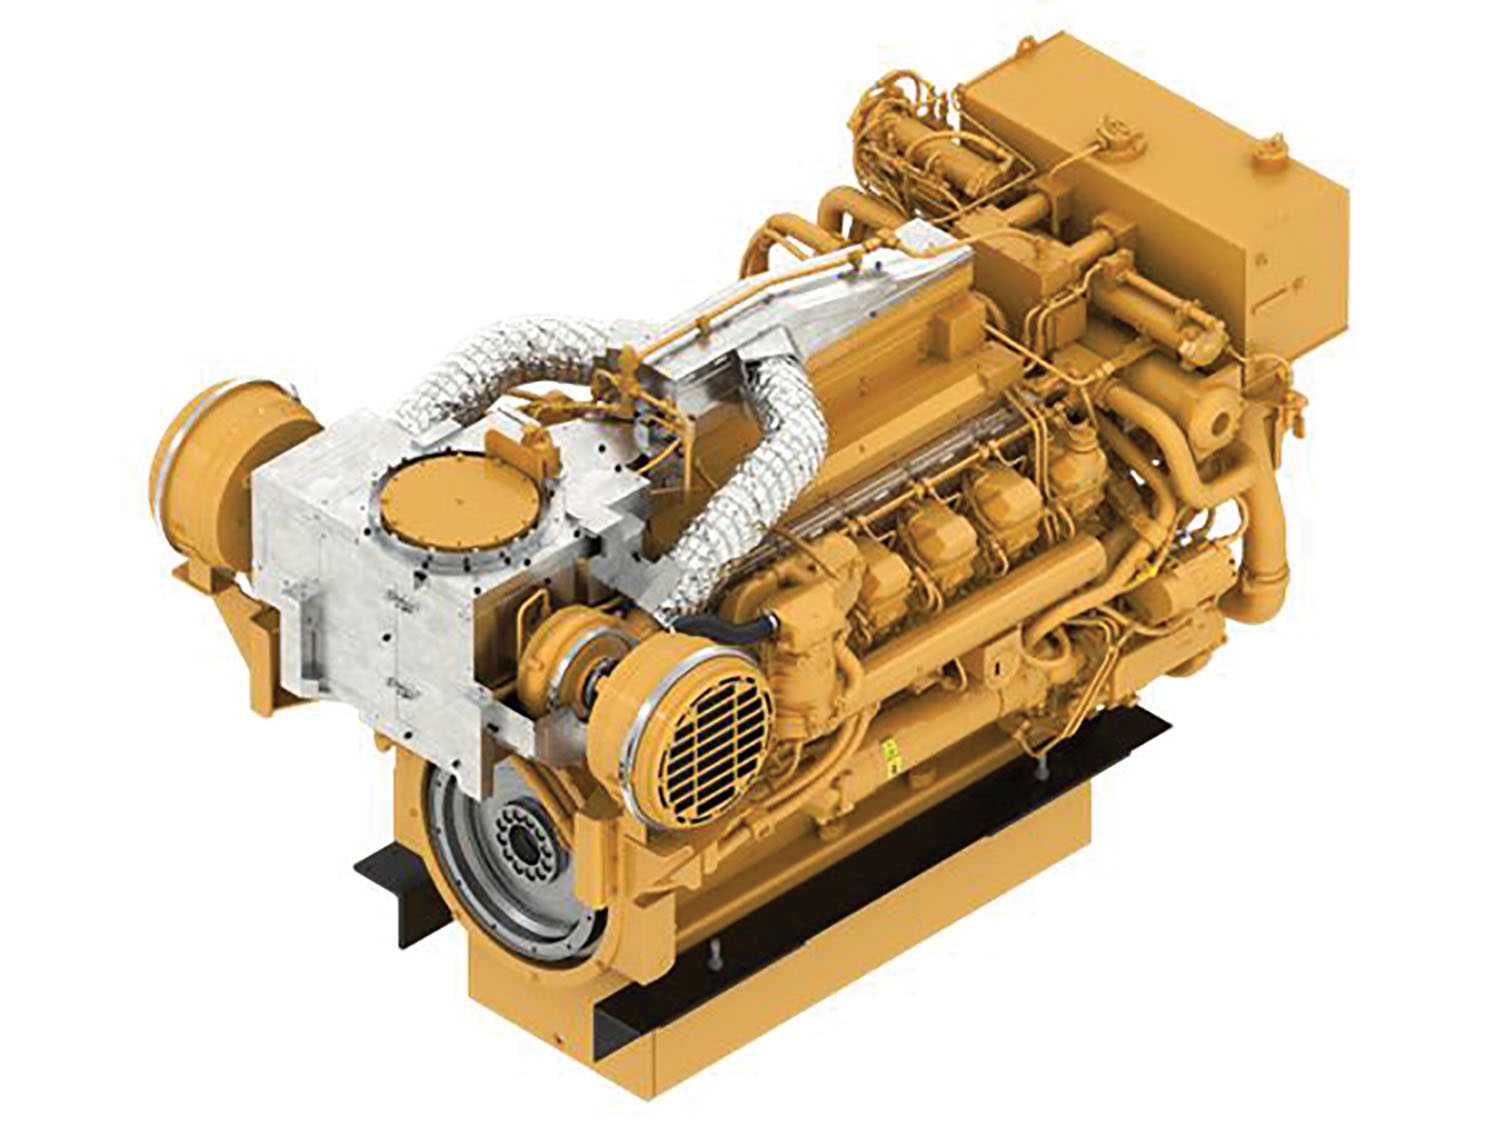 Caterpillar Targets 2026 For Dual-Fuel Engine Rollout